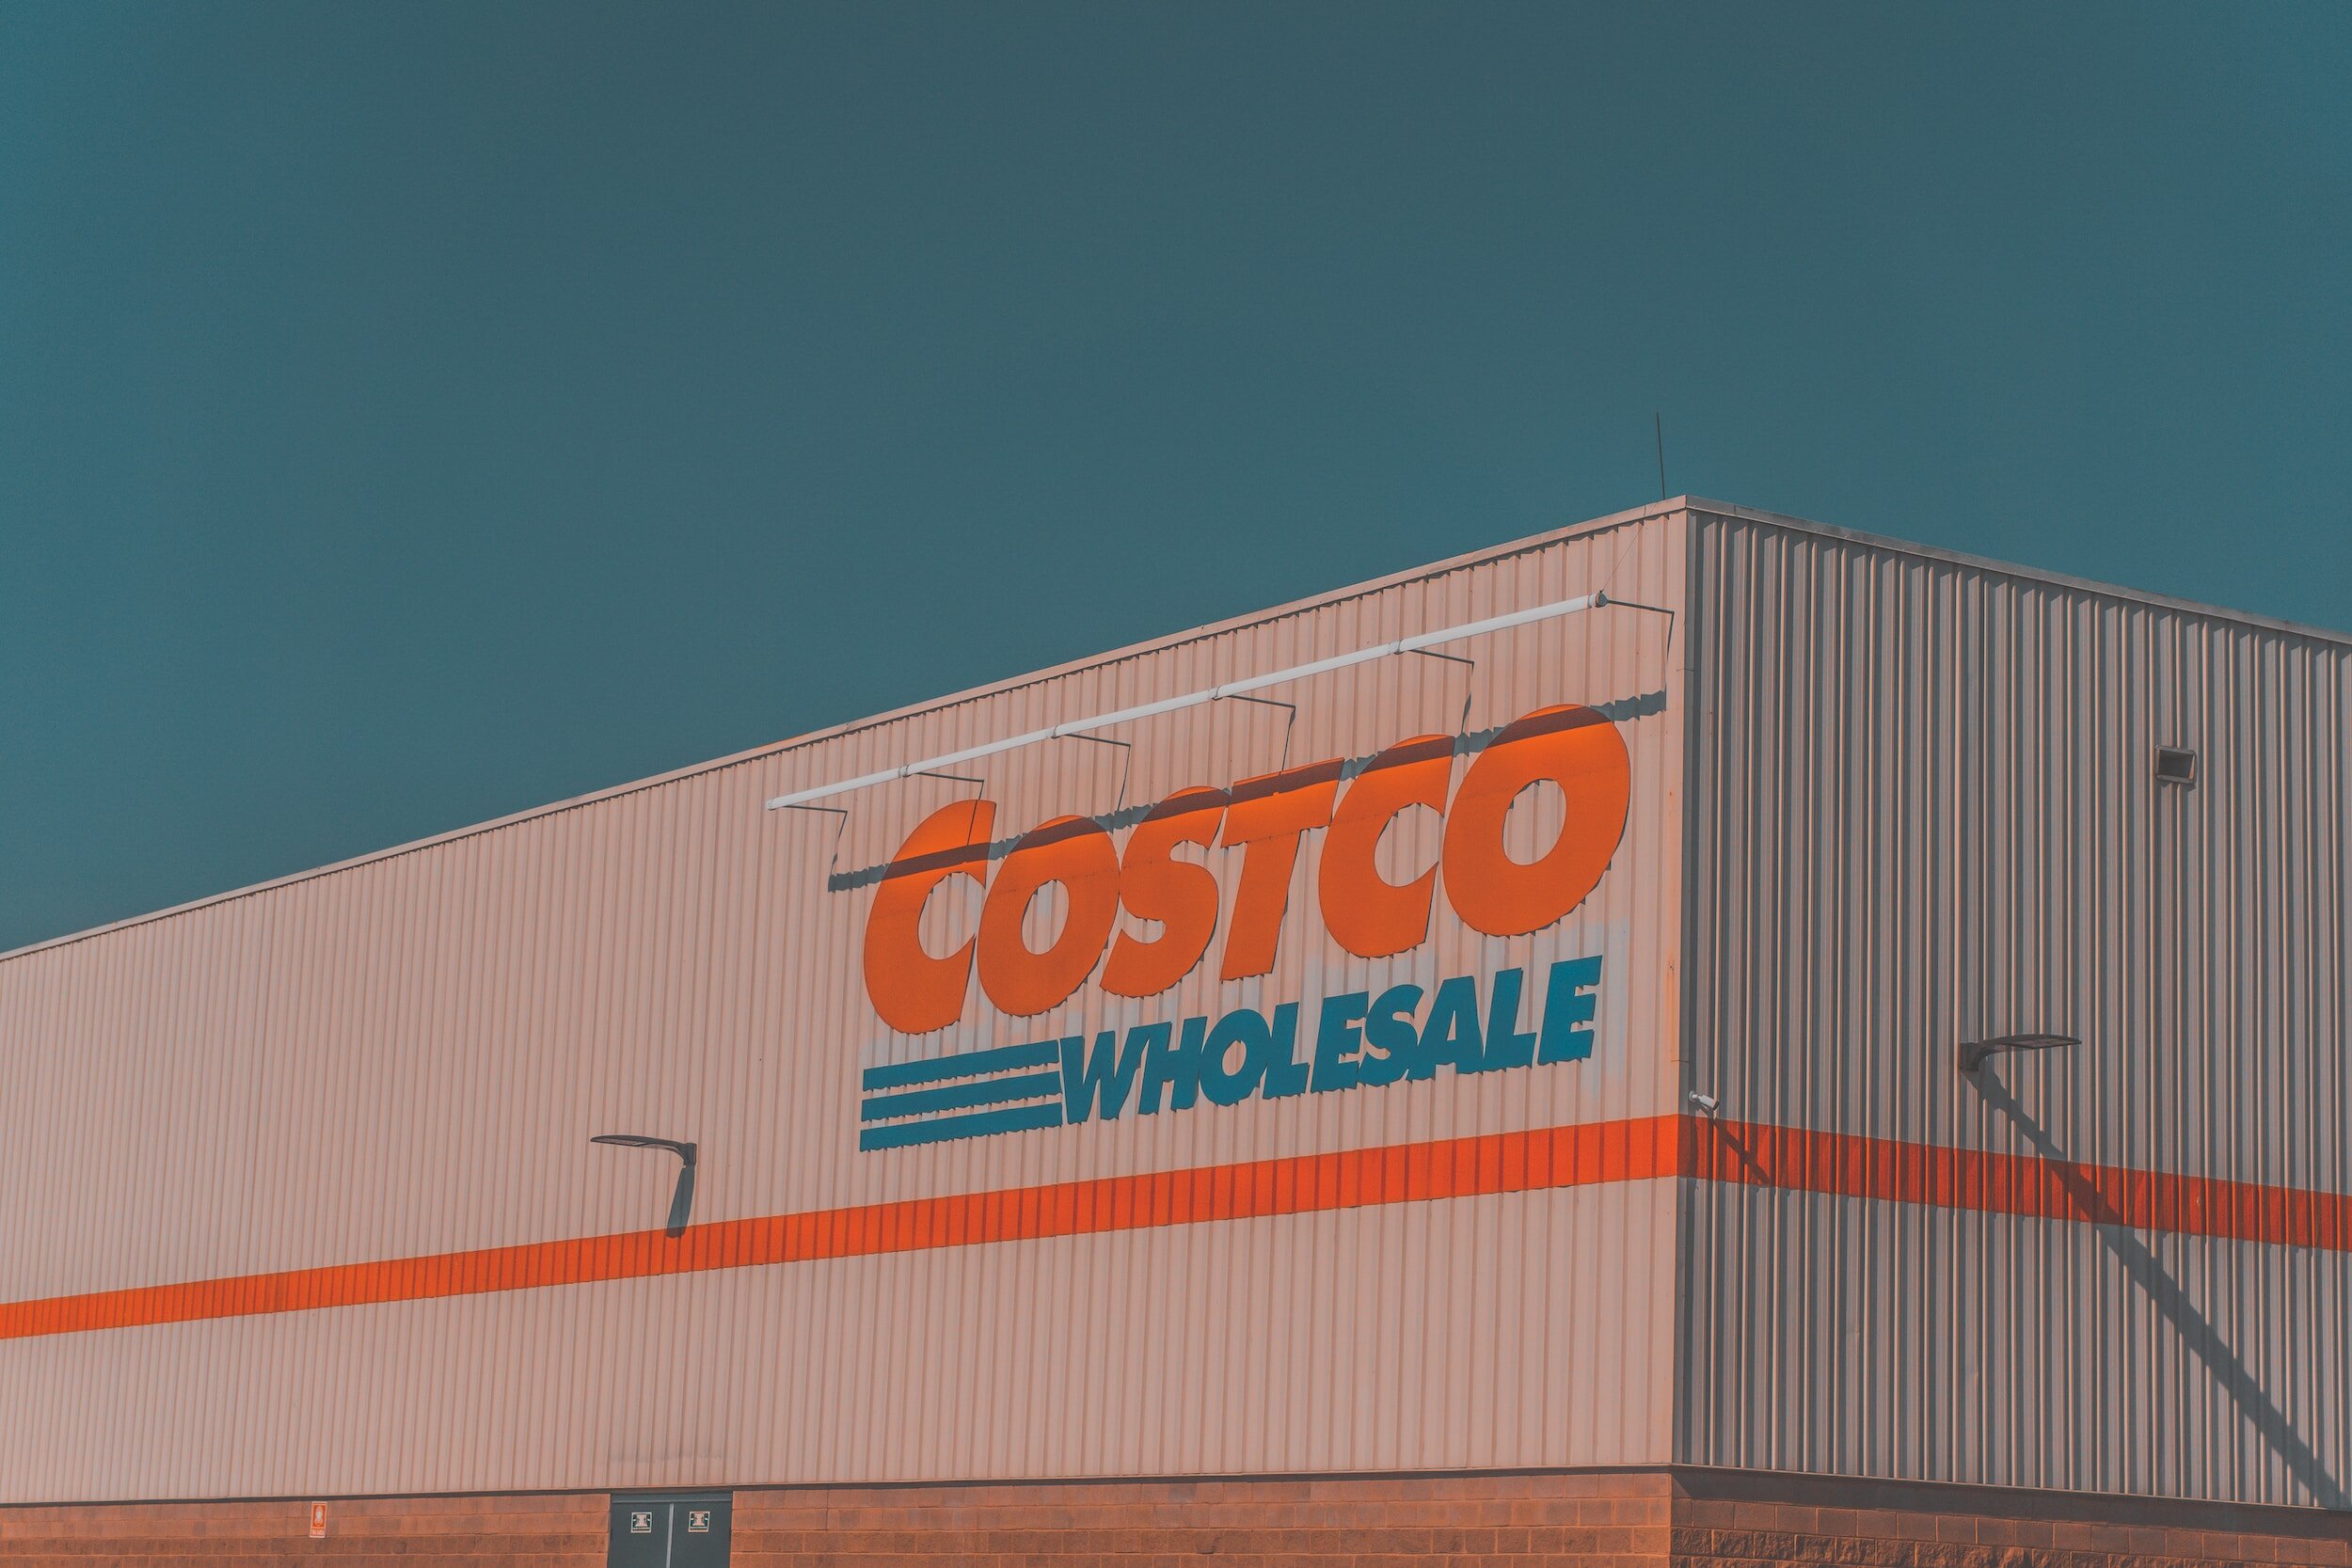 Why Costco Workers Are Choosing Unions A Deep Dive into Their Fight for Better Conditions2